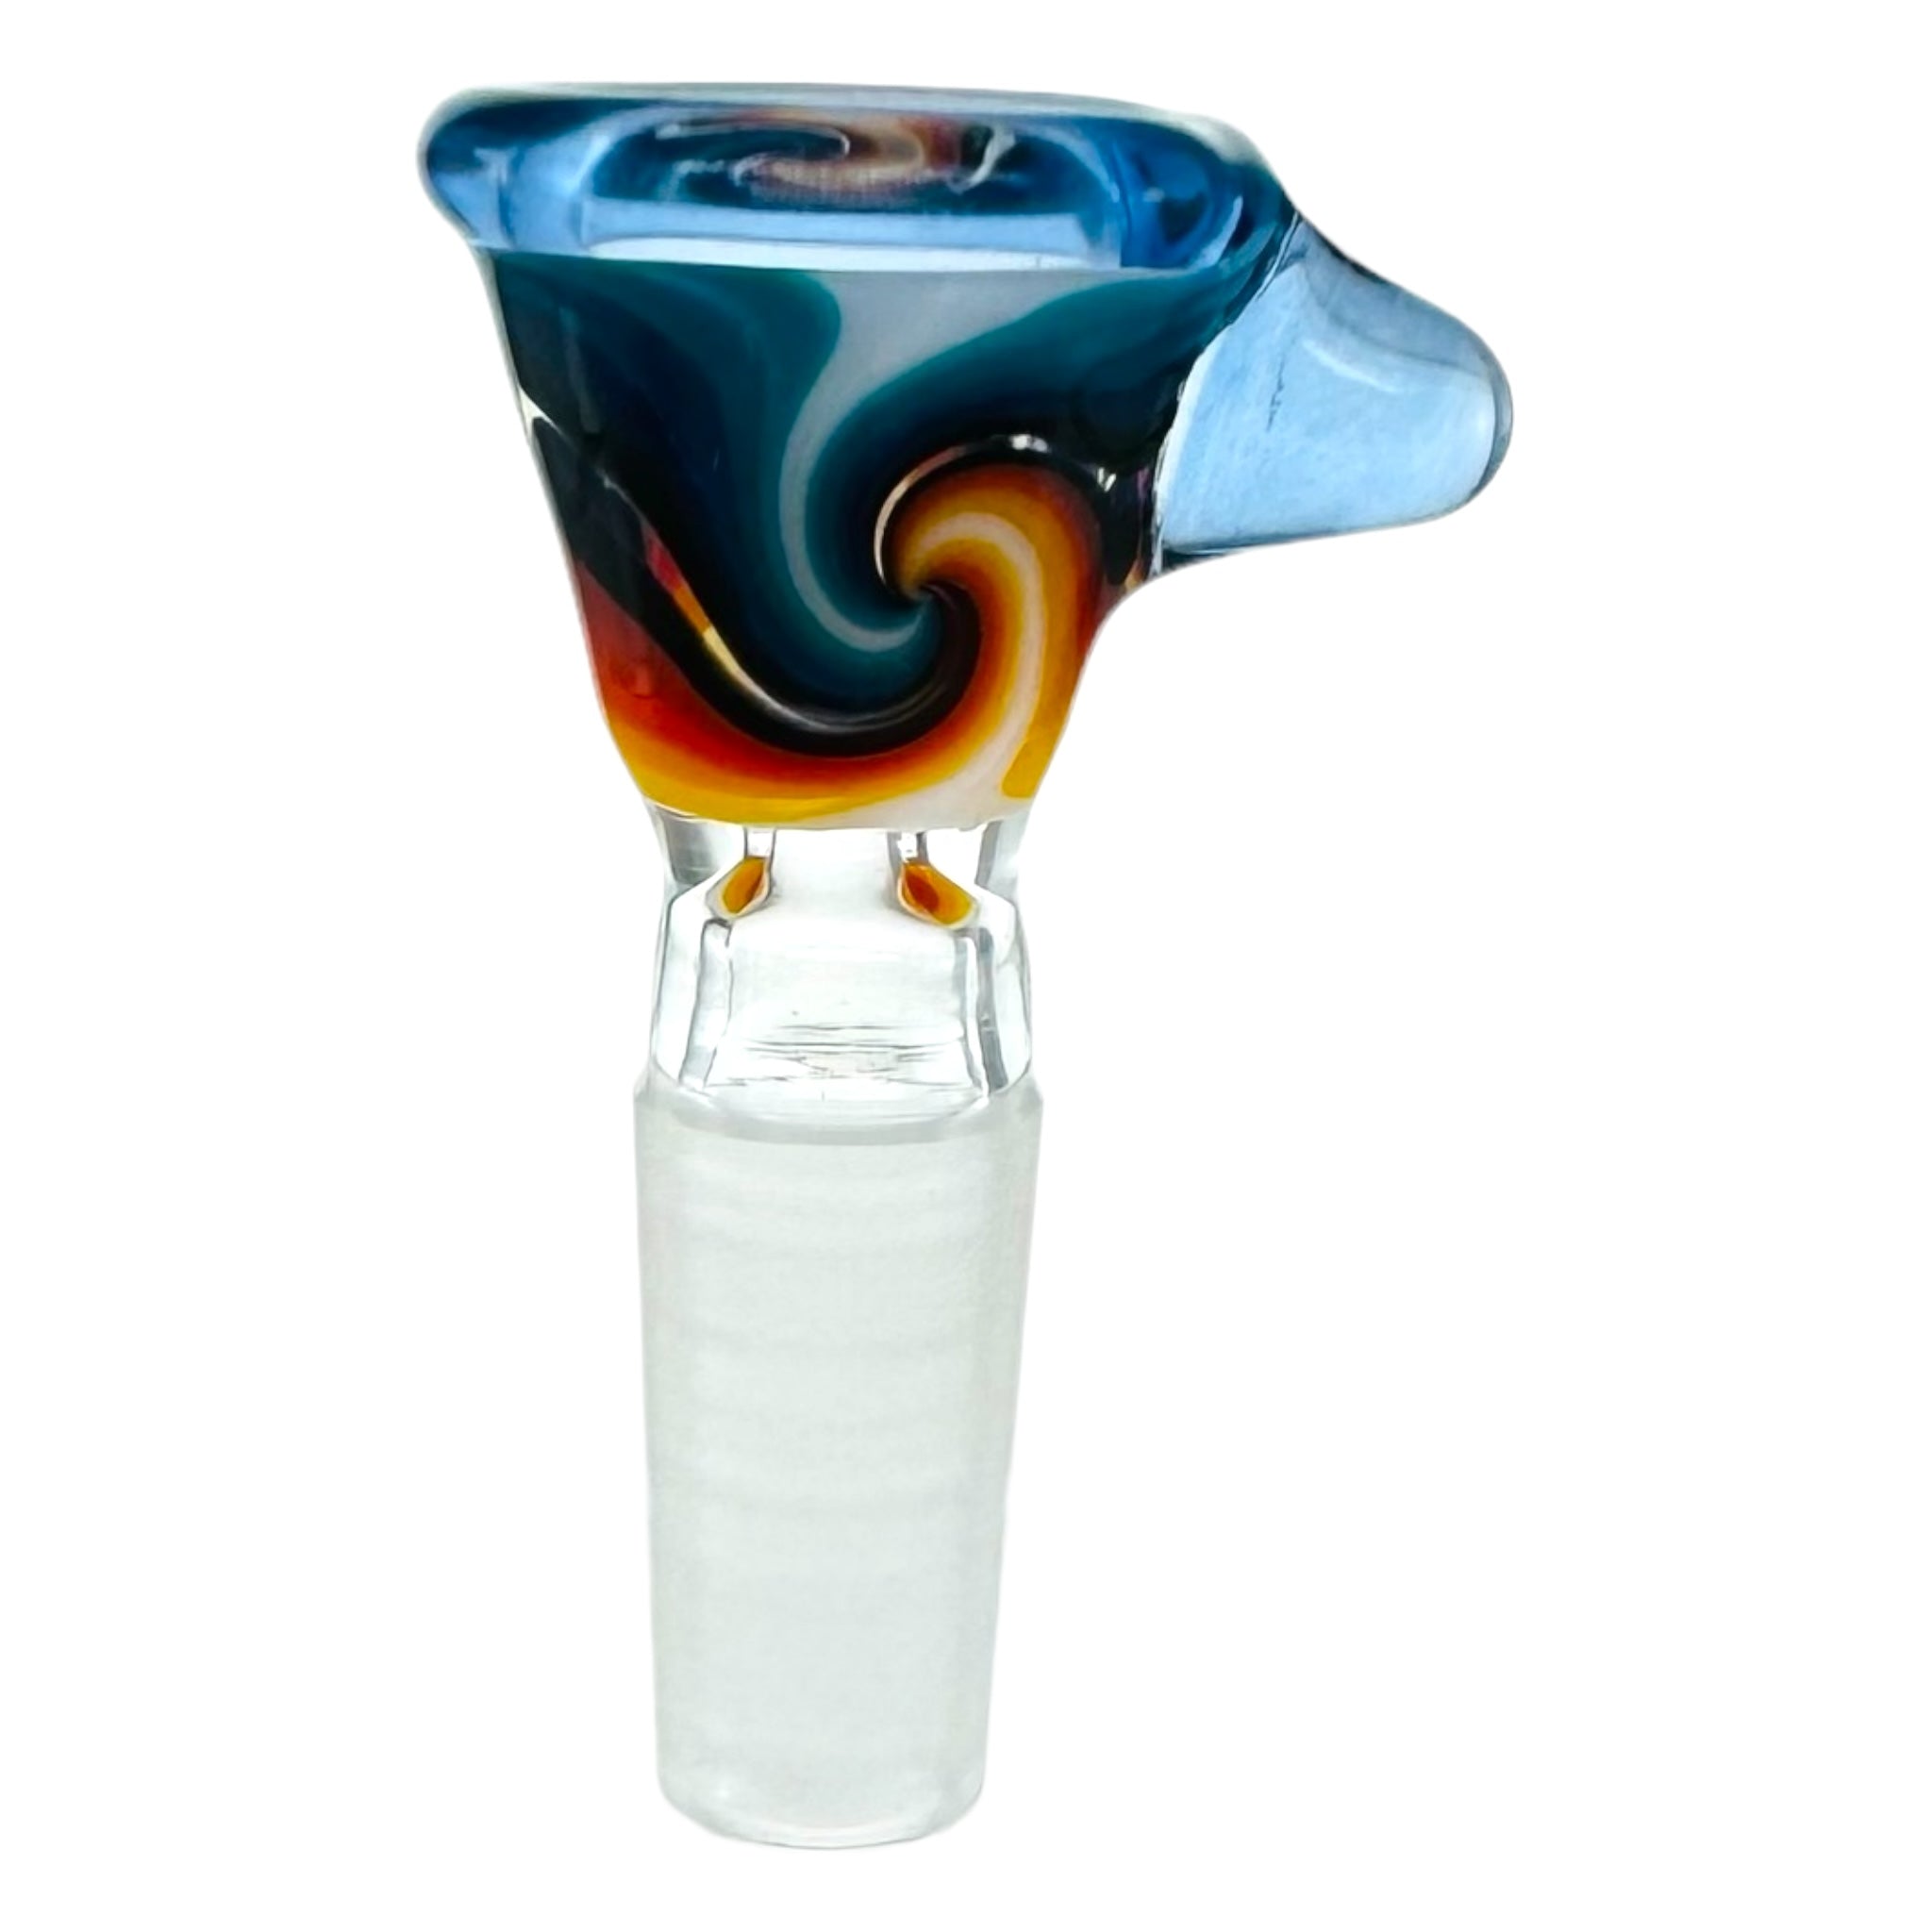 N3RD Glass 10mm Flower Fire And Ice With Blue